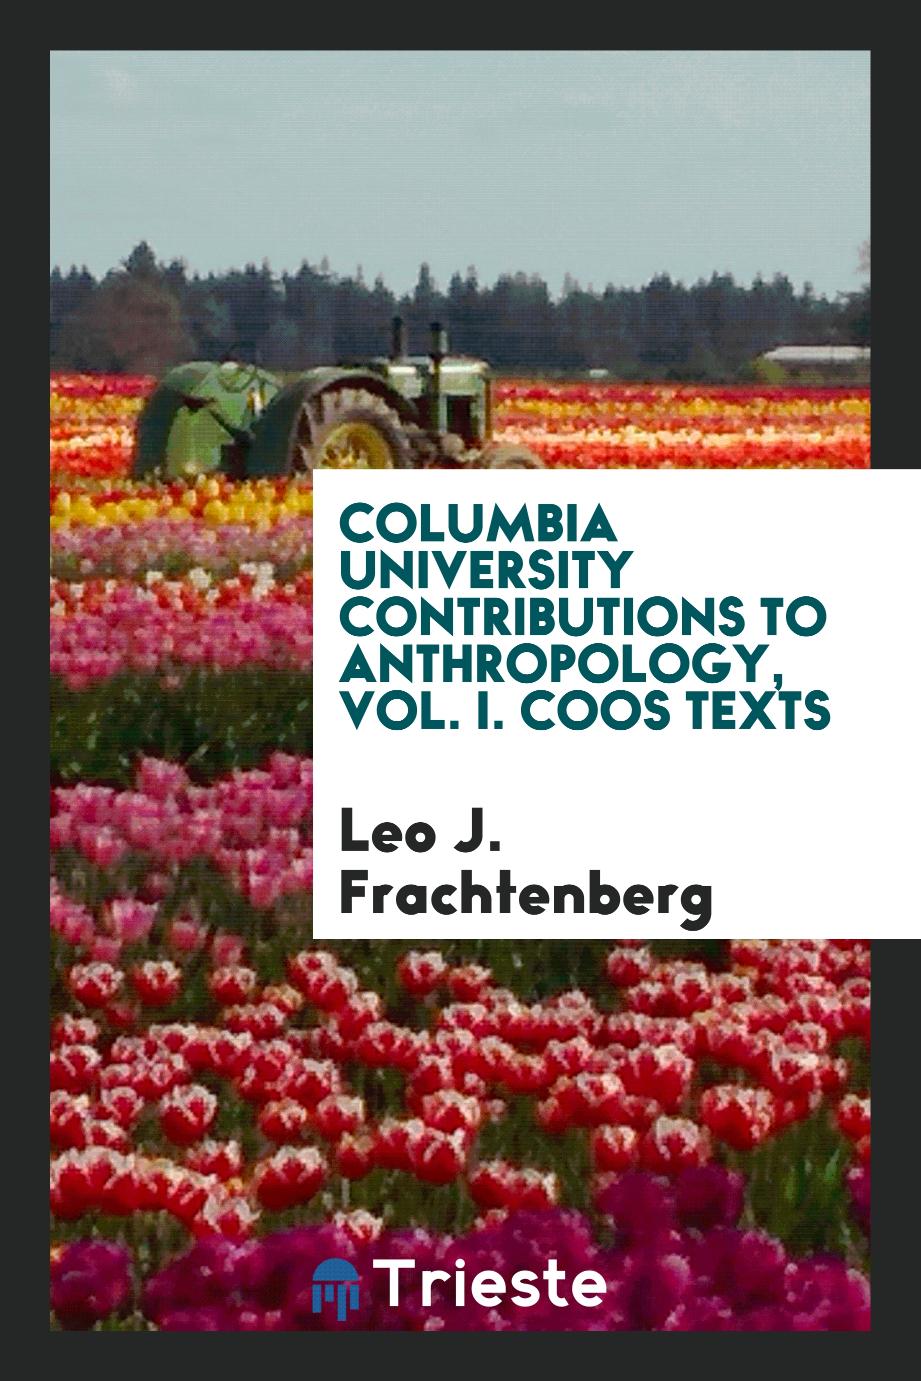 Columbia University Contributions to Anthropology, Vol. I. Coos texts